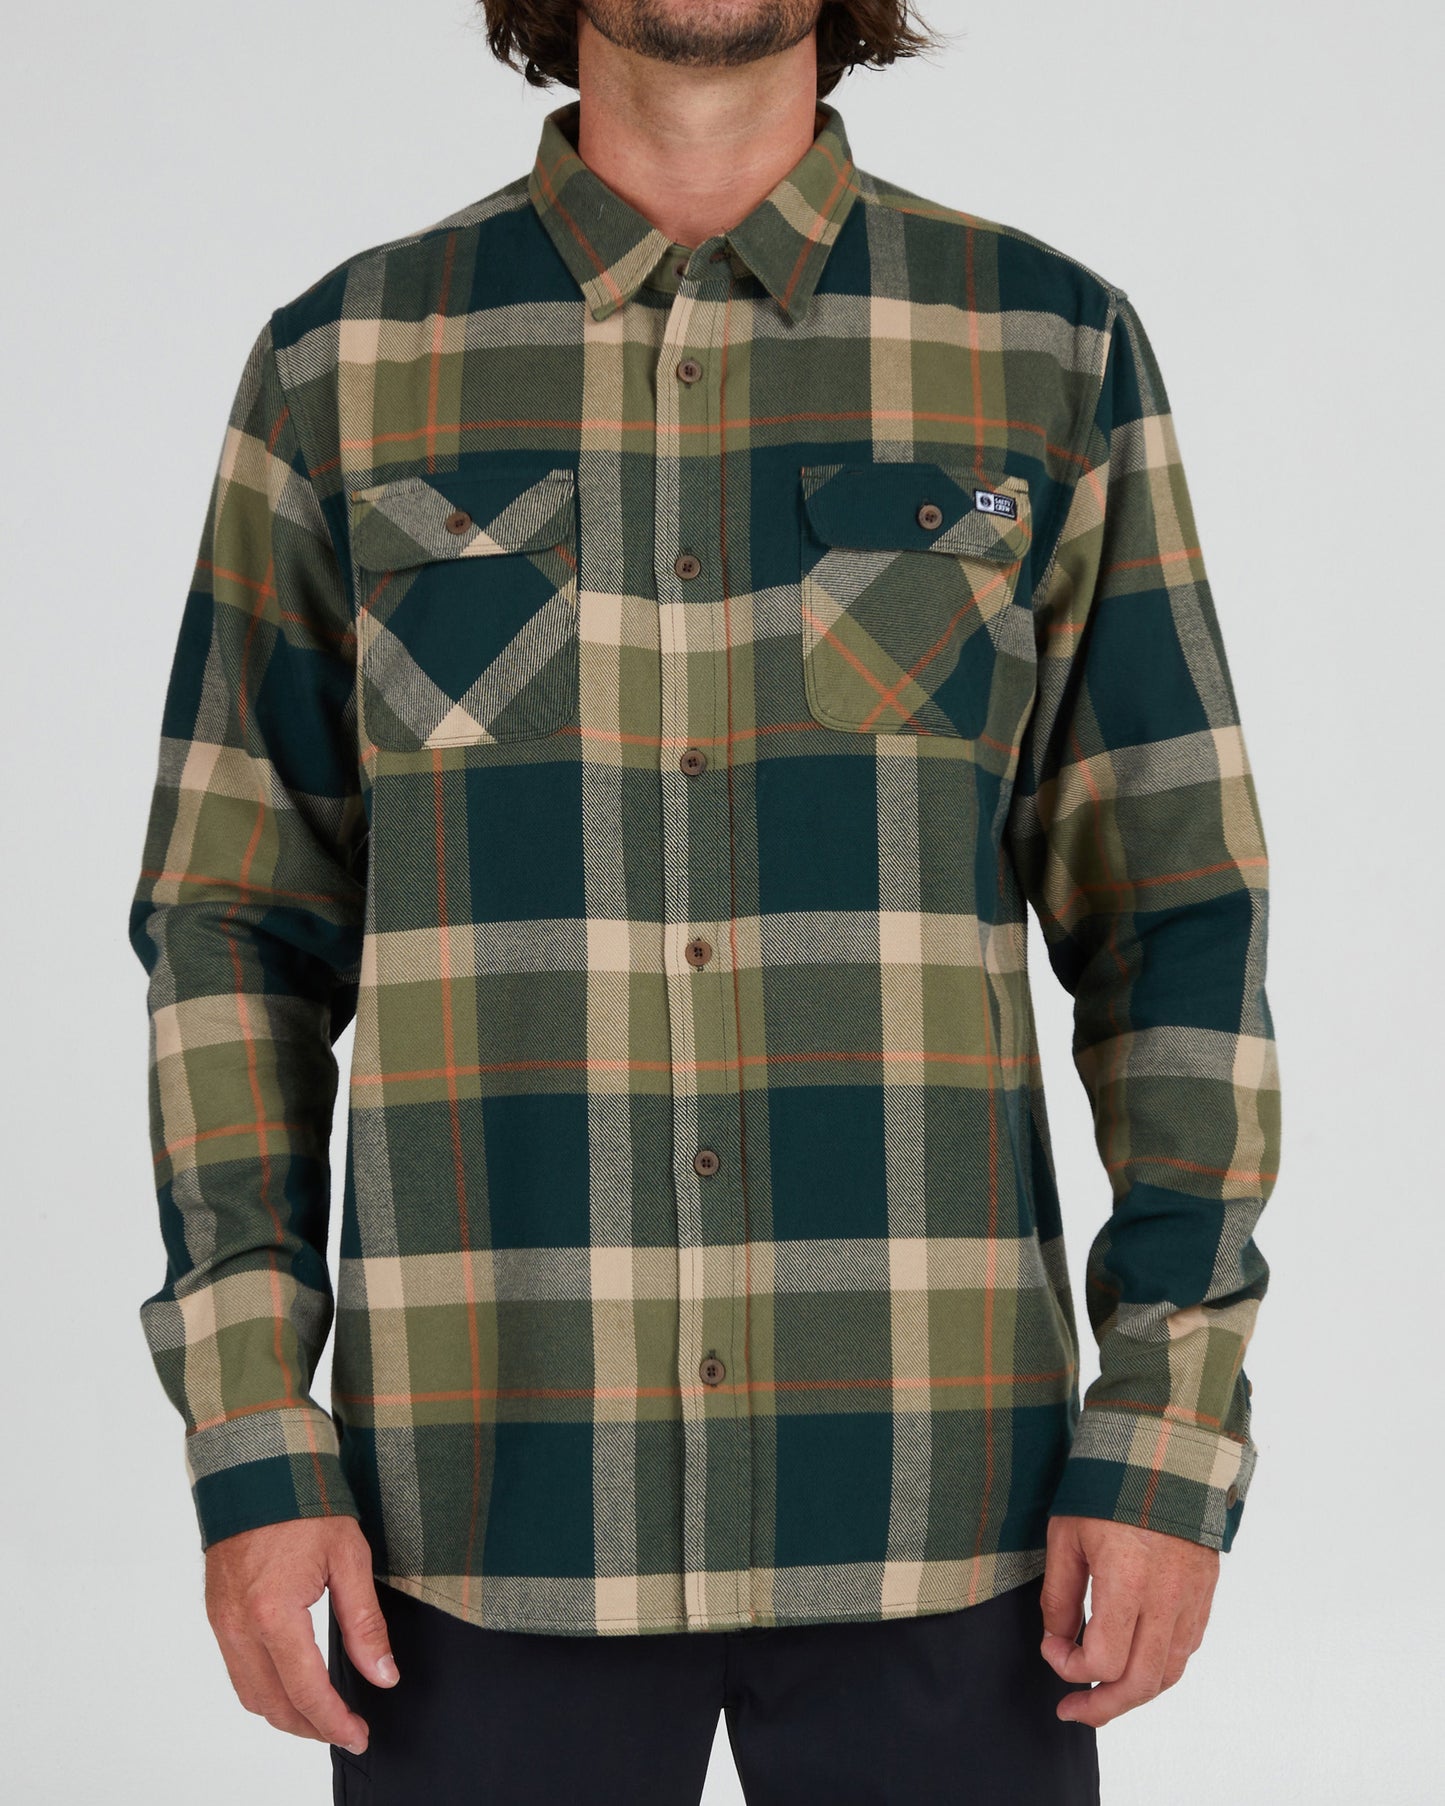 On body front of the Dawn Patrol Spruce Flannel